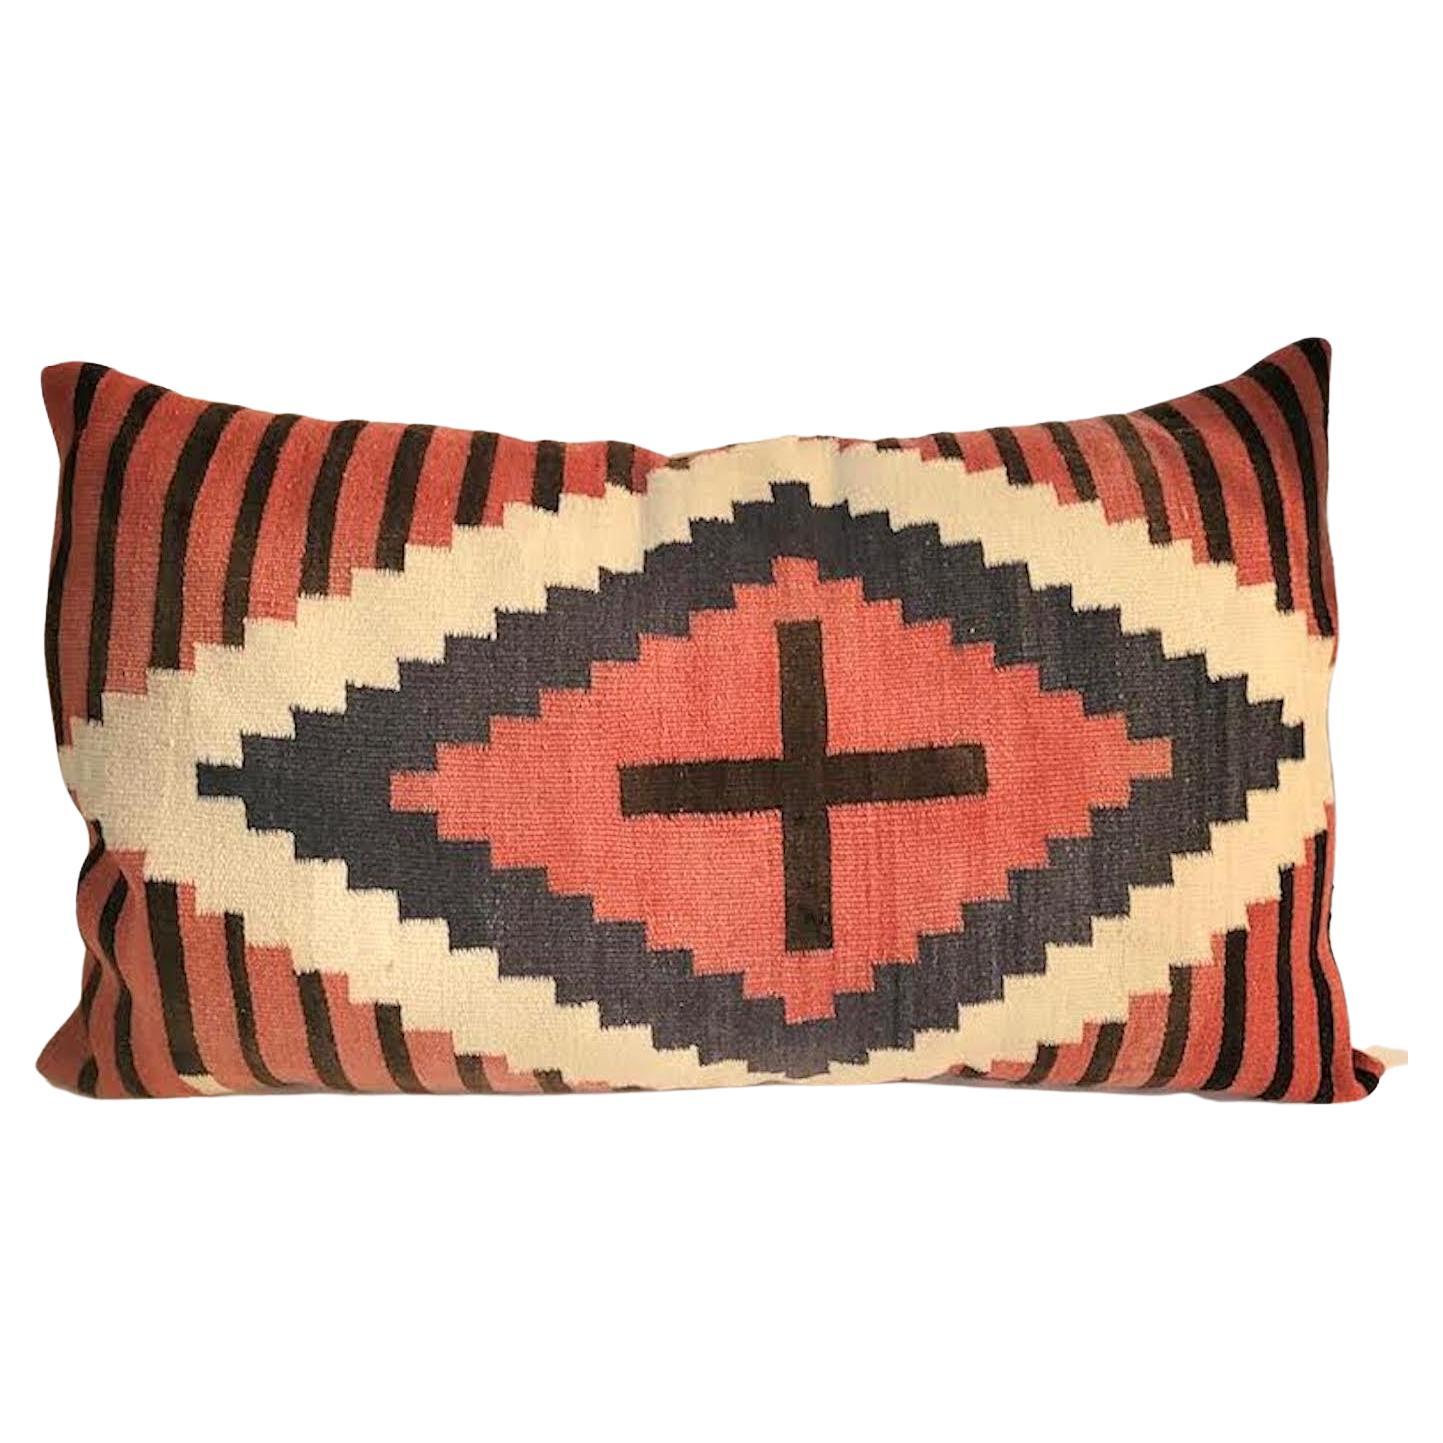 Geometric Indian Weaving Bolster Pillow with Cross